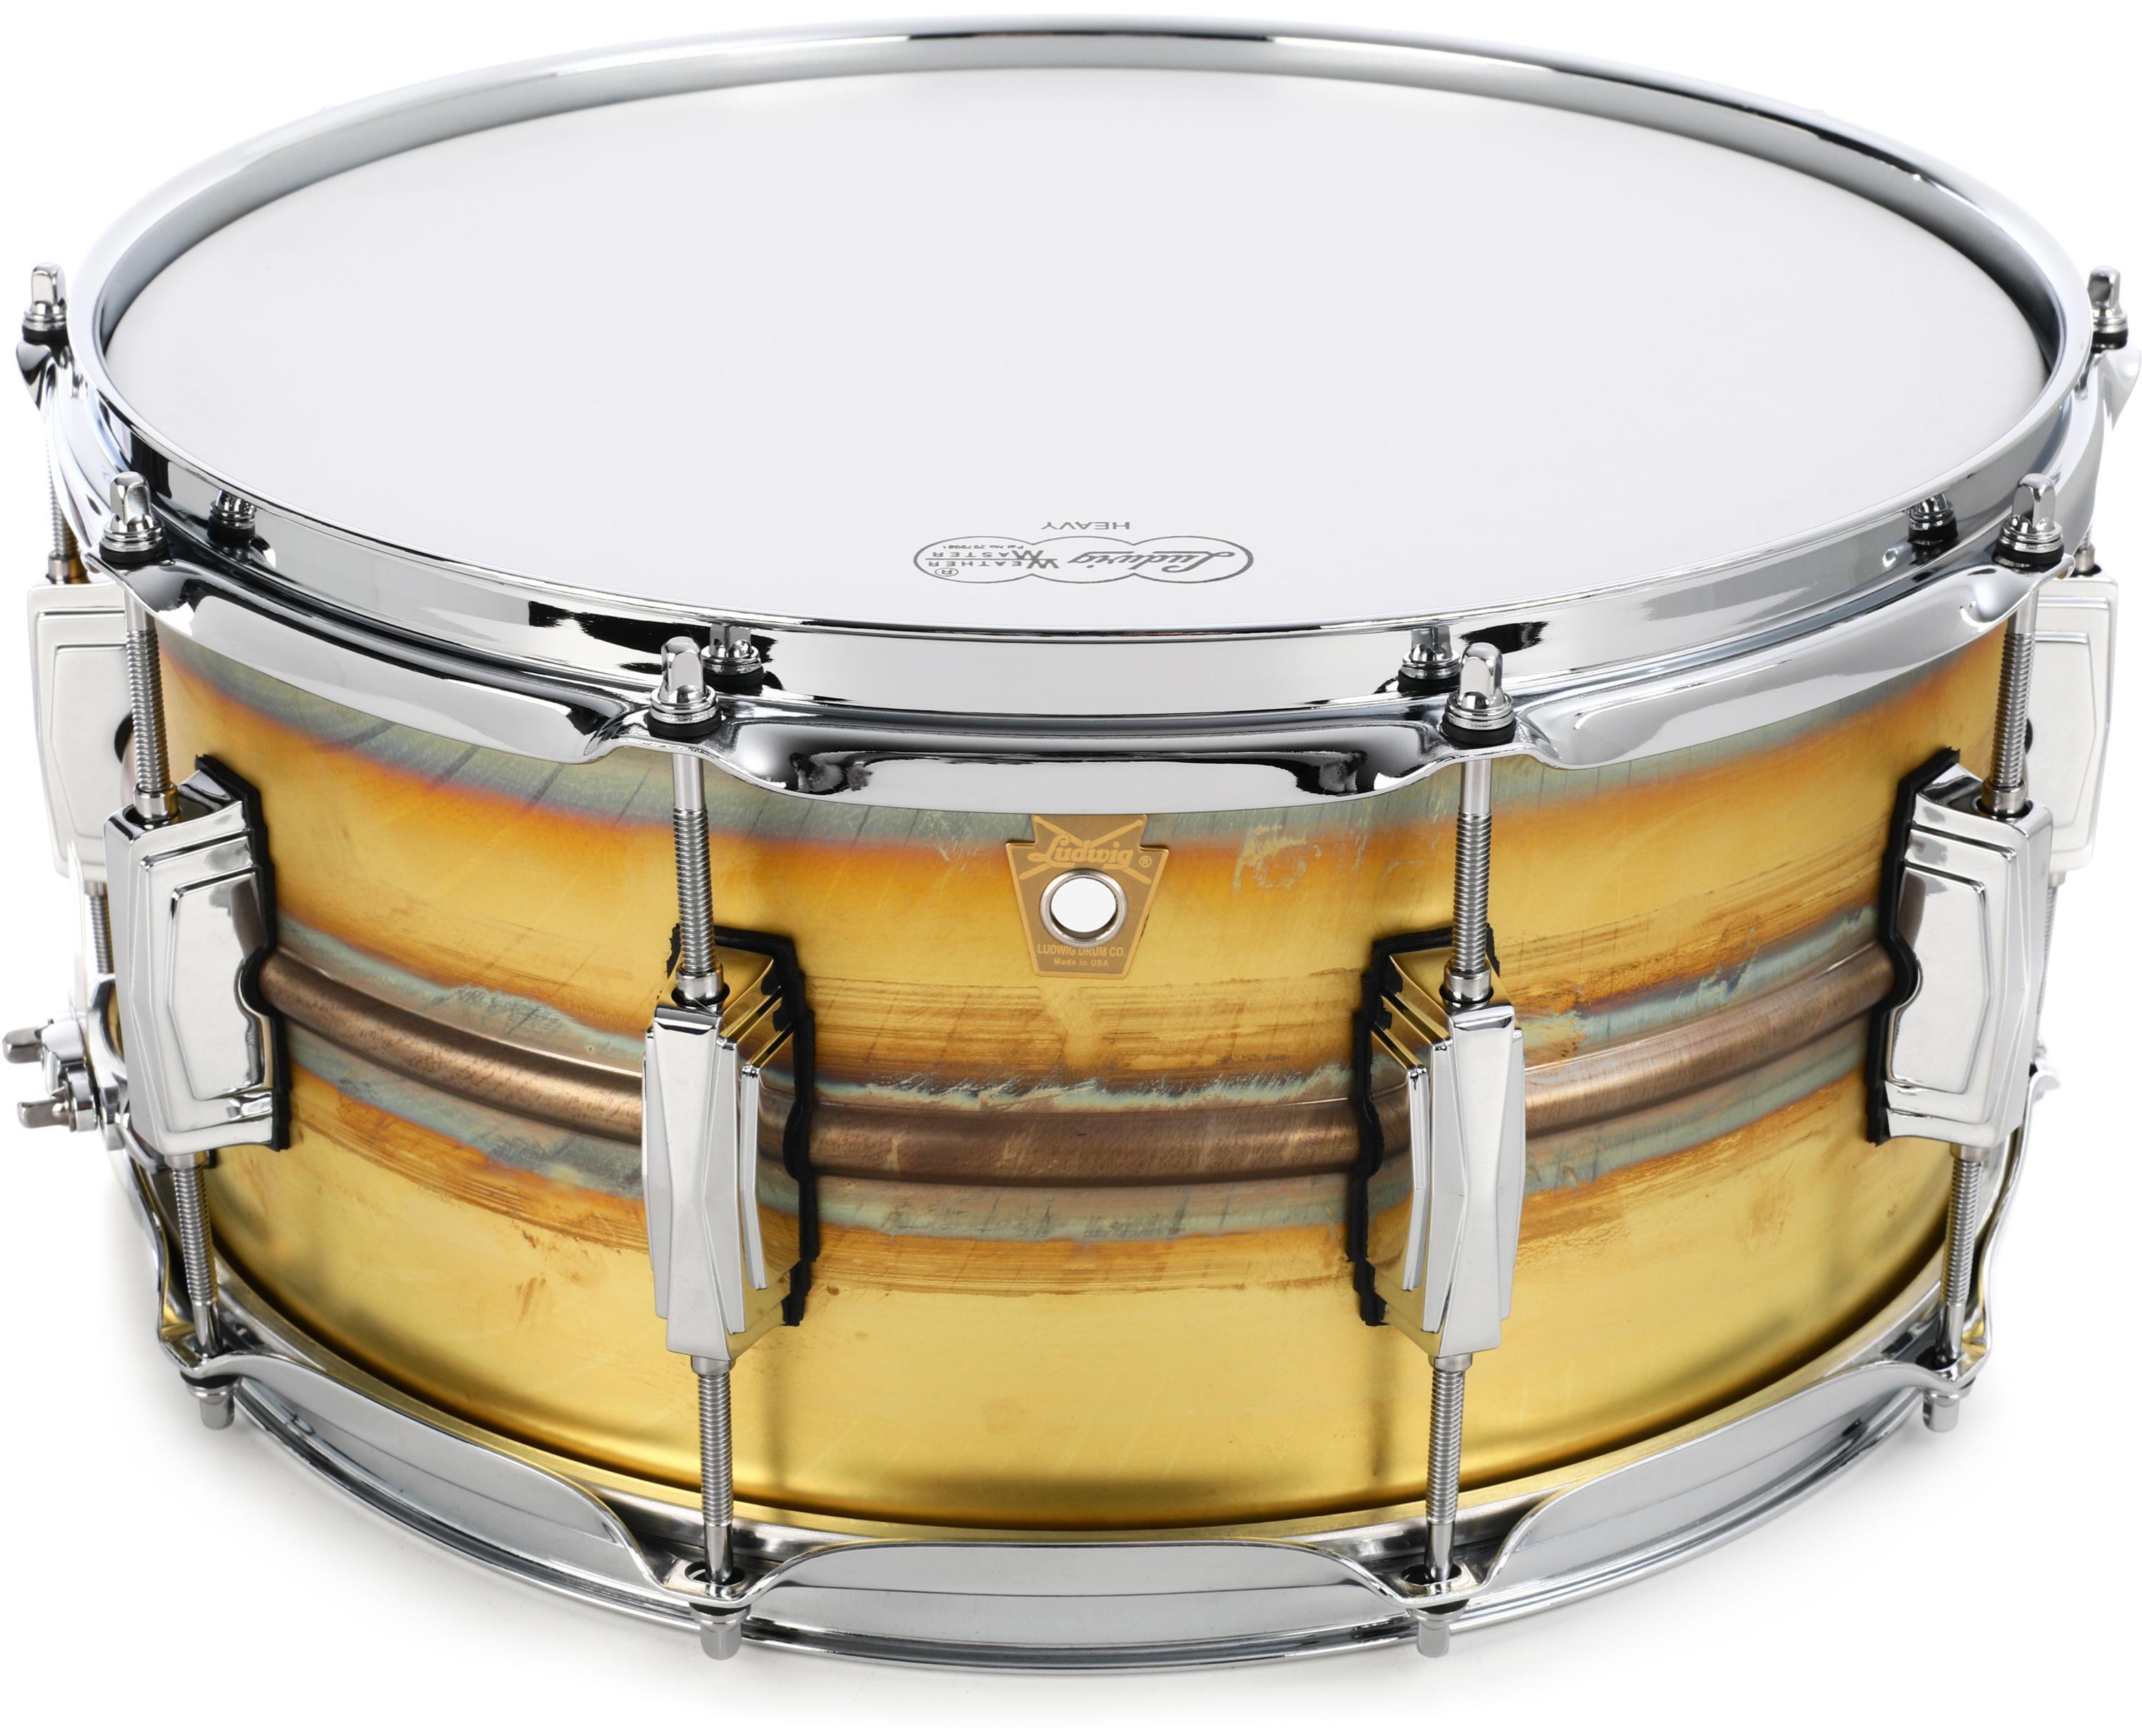 Ludwig Raw Brass Snare Drum - 6.5 x 14-inch - Raw Patina | Sweetwater